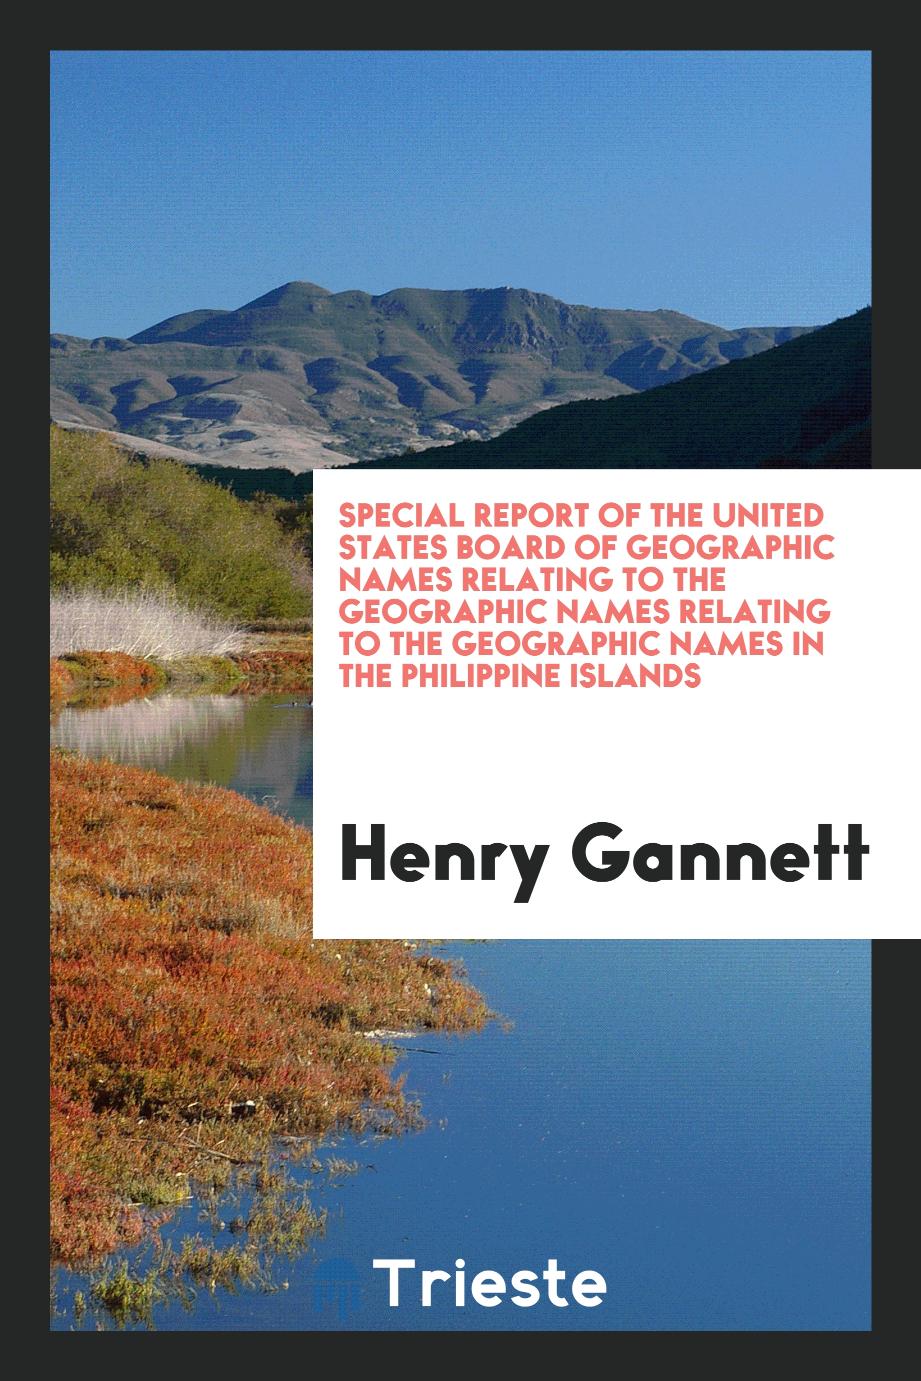 Special Report of the United States Board of Geographic Names Relating to the Geographic Names relating to the geographic names in the Philippine islands